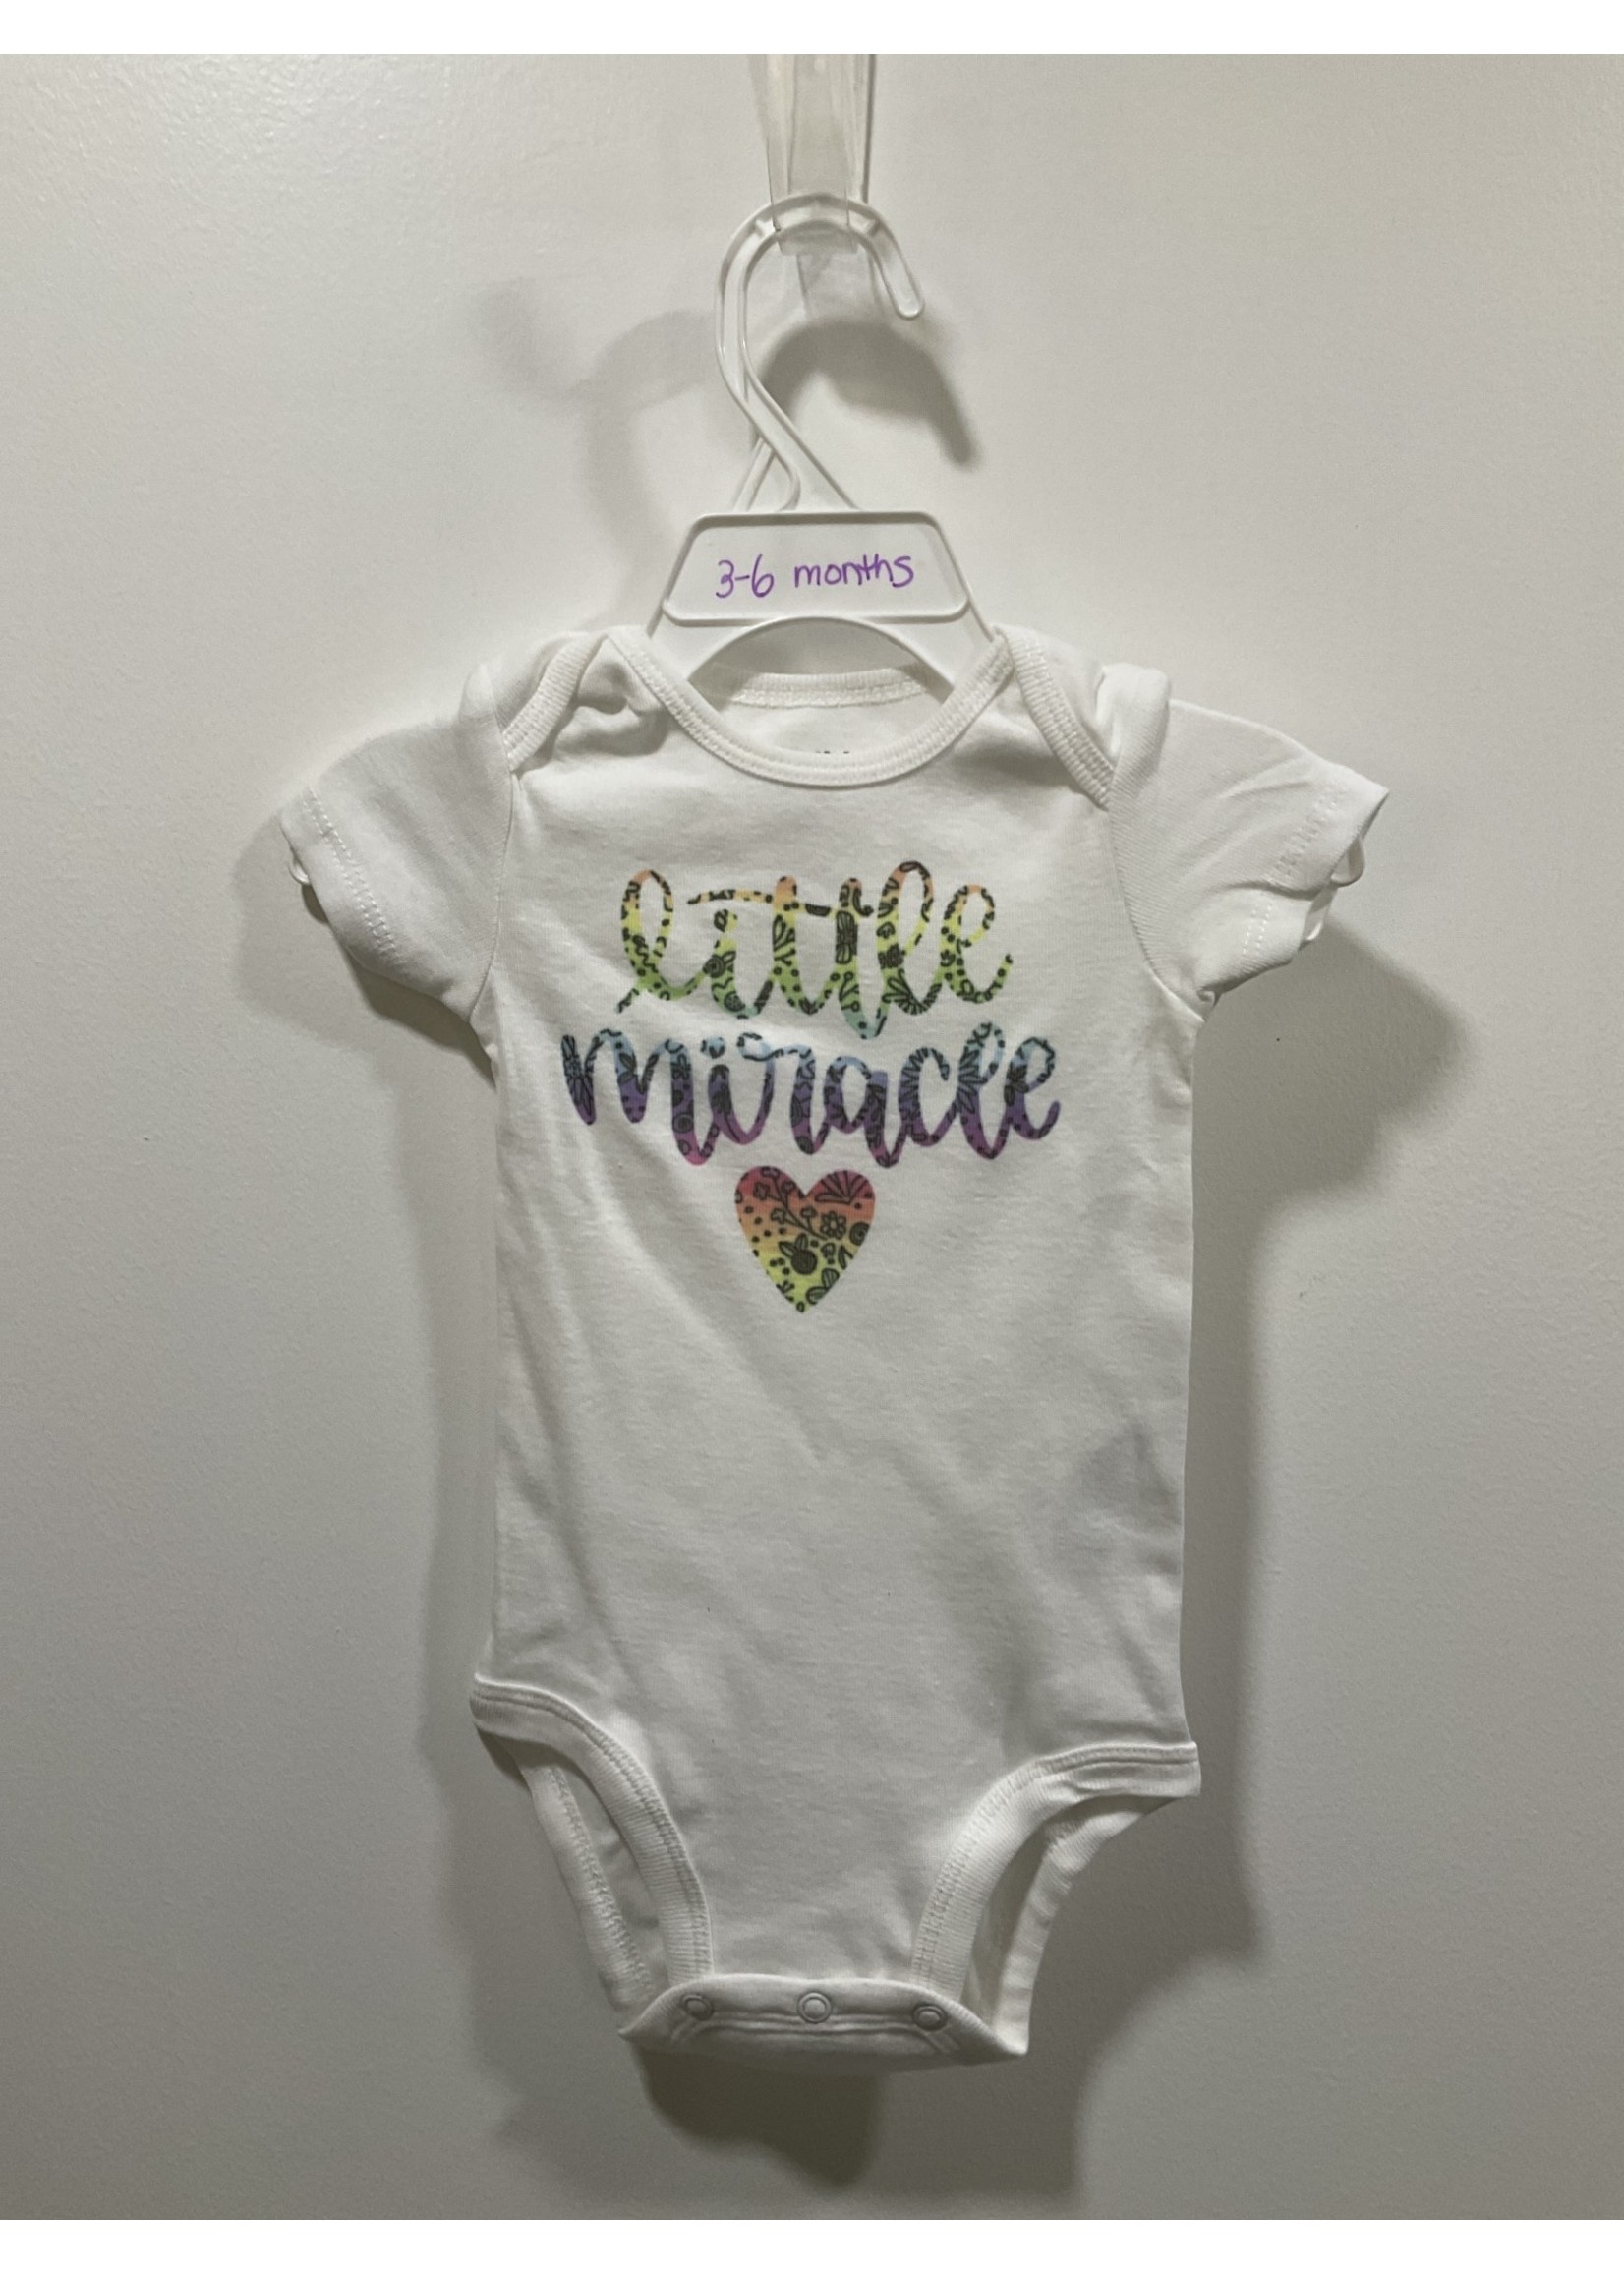 My New Favorite Thing Onsie White w/Colorful Flower Print "Little Miracle" short sleeve 3-6 month